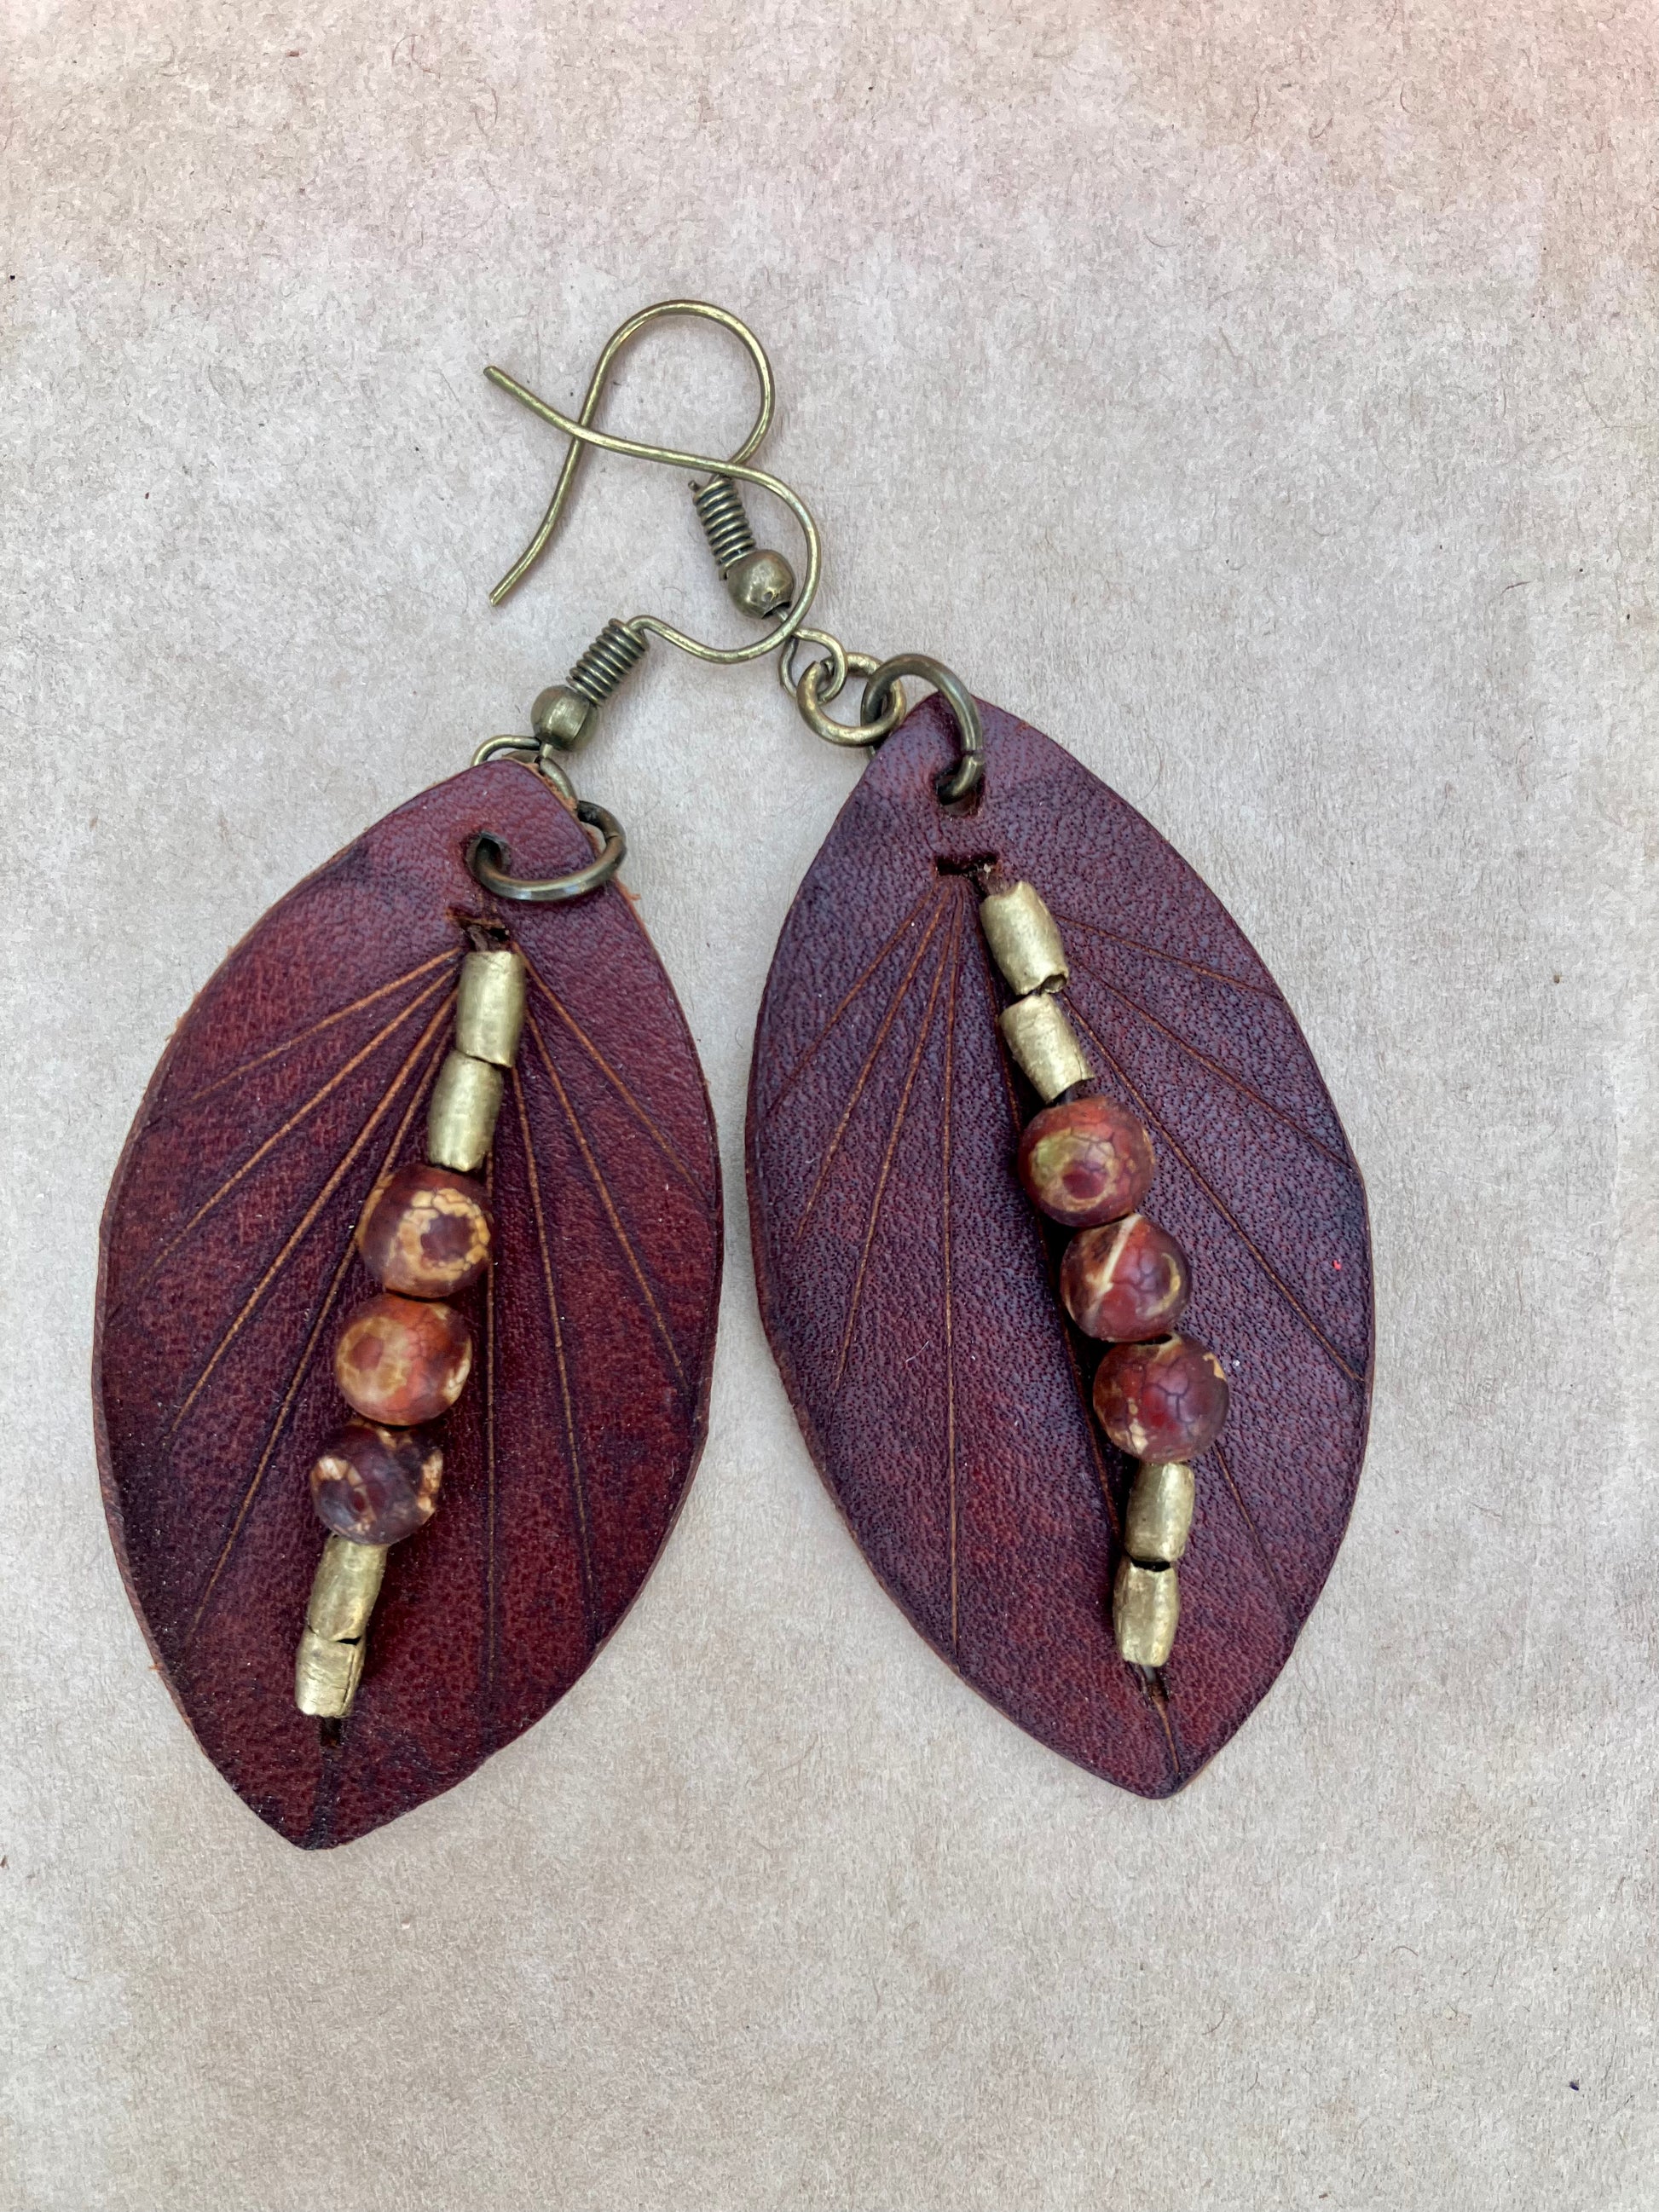 lightweight leather earrings with embossed lines; hypoallergenic, nickel free; antique brass and agate beads; 3 inch high; handmade.